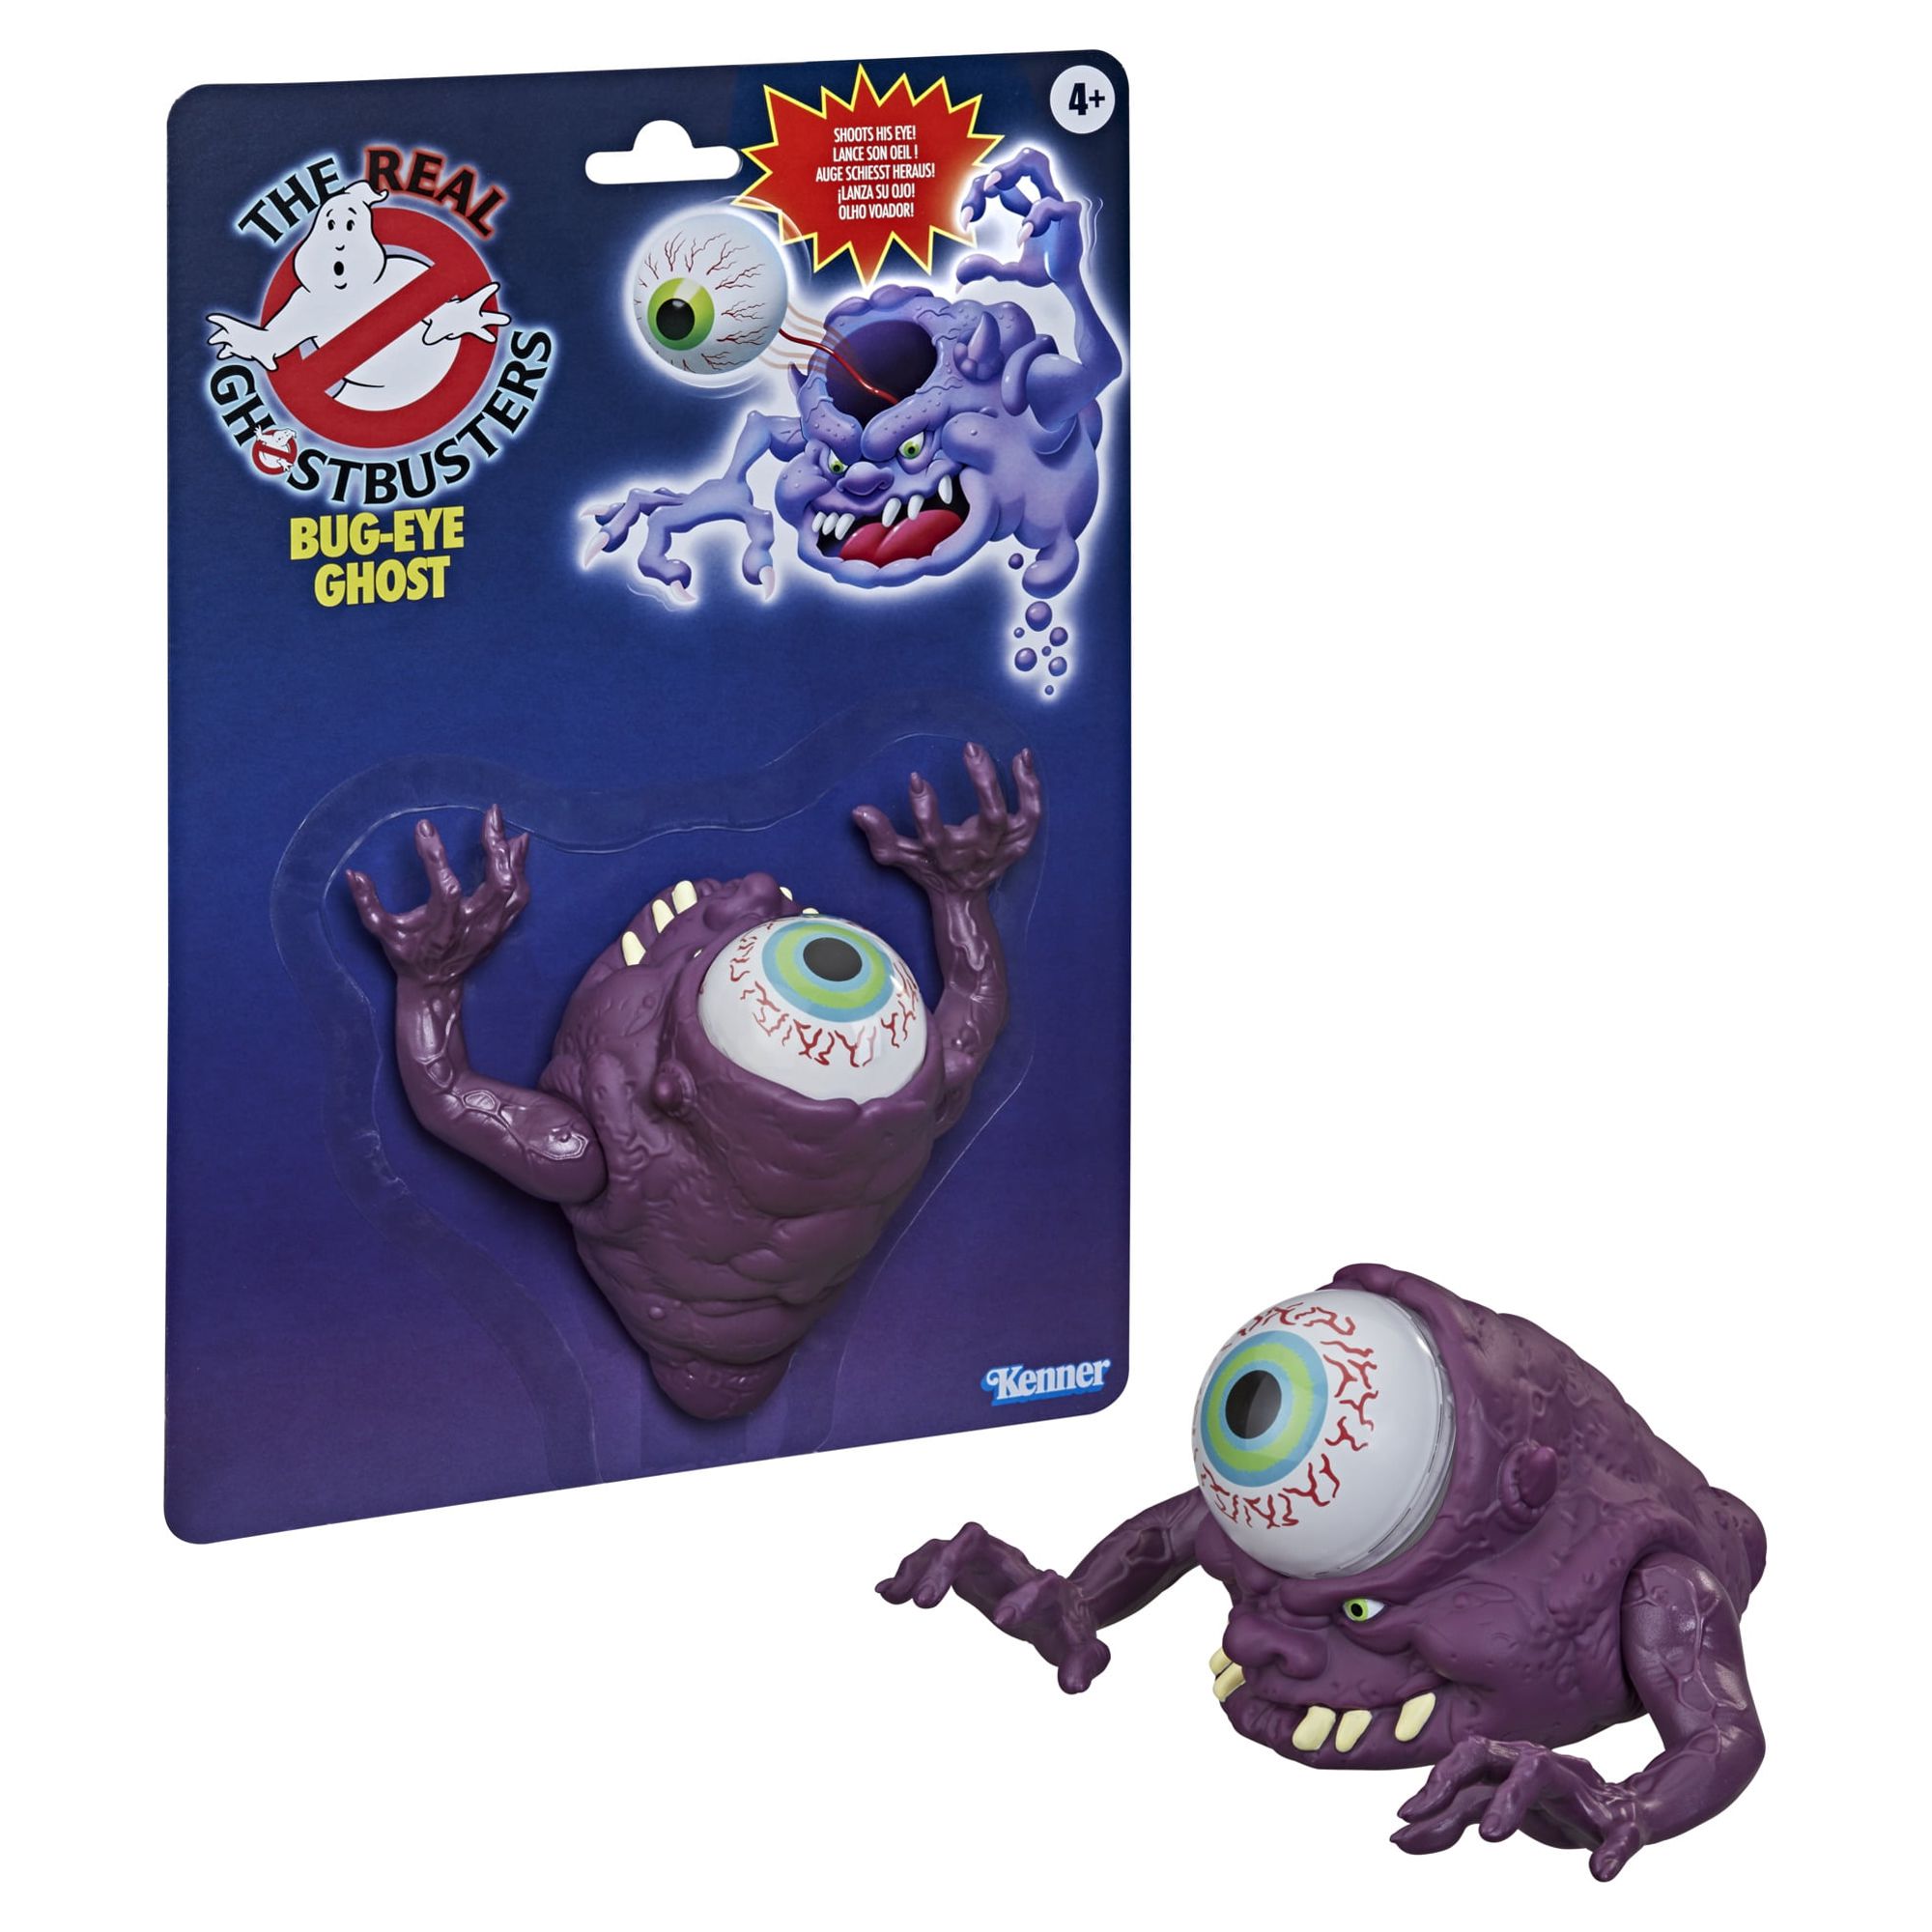 Ghostbusters Kenner Classics The Real Ghostbusters Bug-Eye Ghost Retro Kids Toy Action Figure for Boys and Girls Ages 4 5 6 7 8 and Up - image 1 of 6